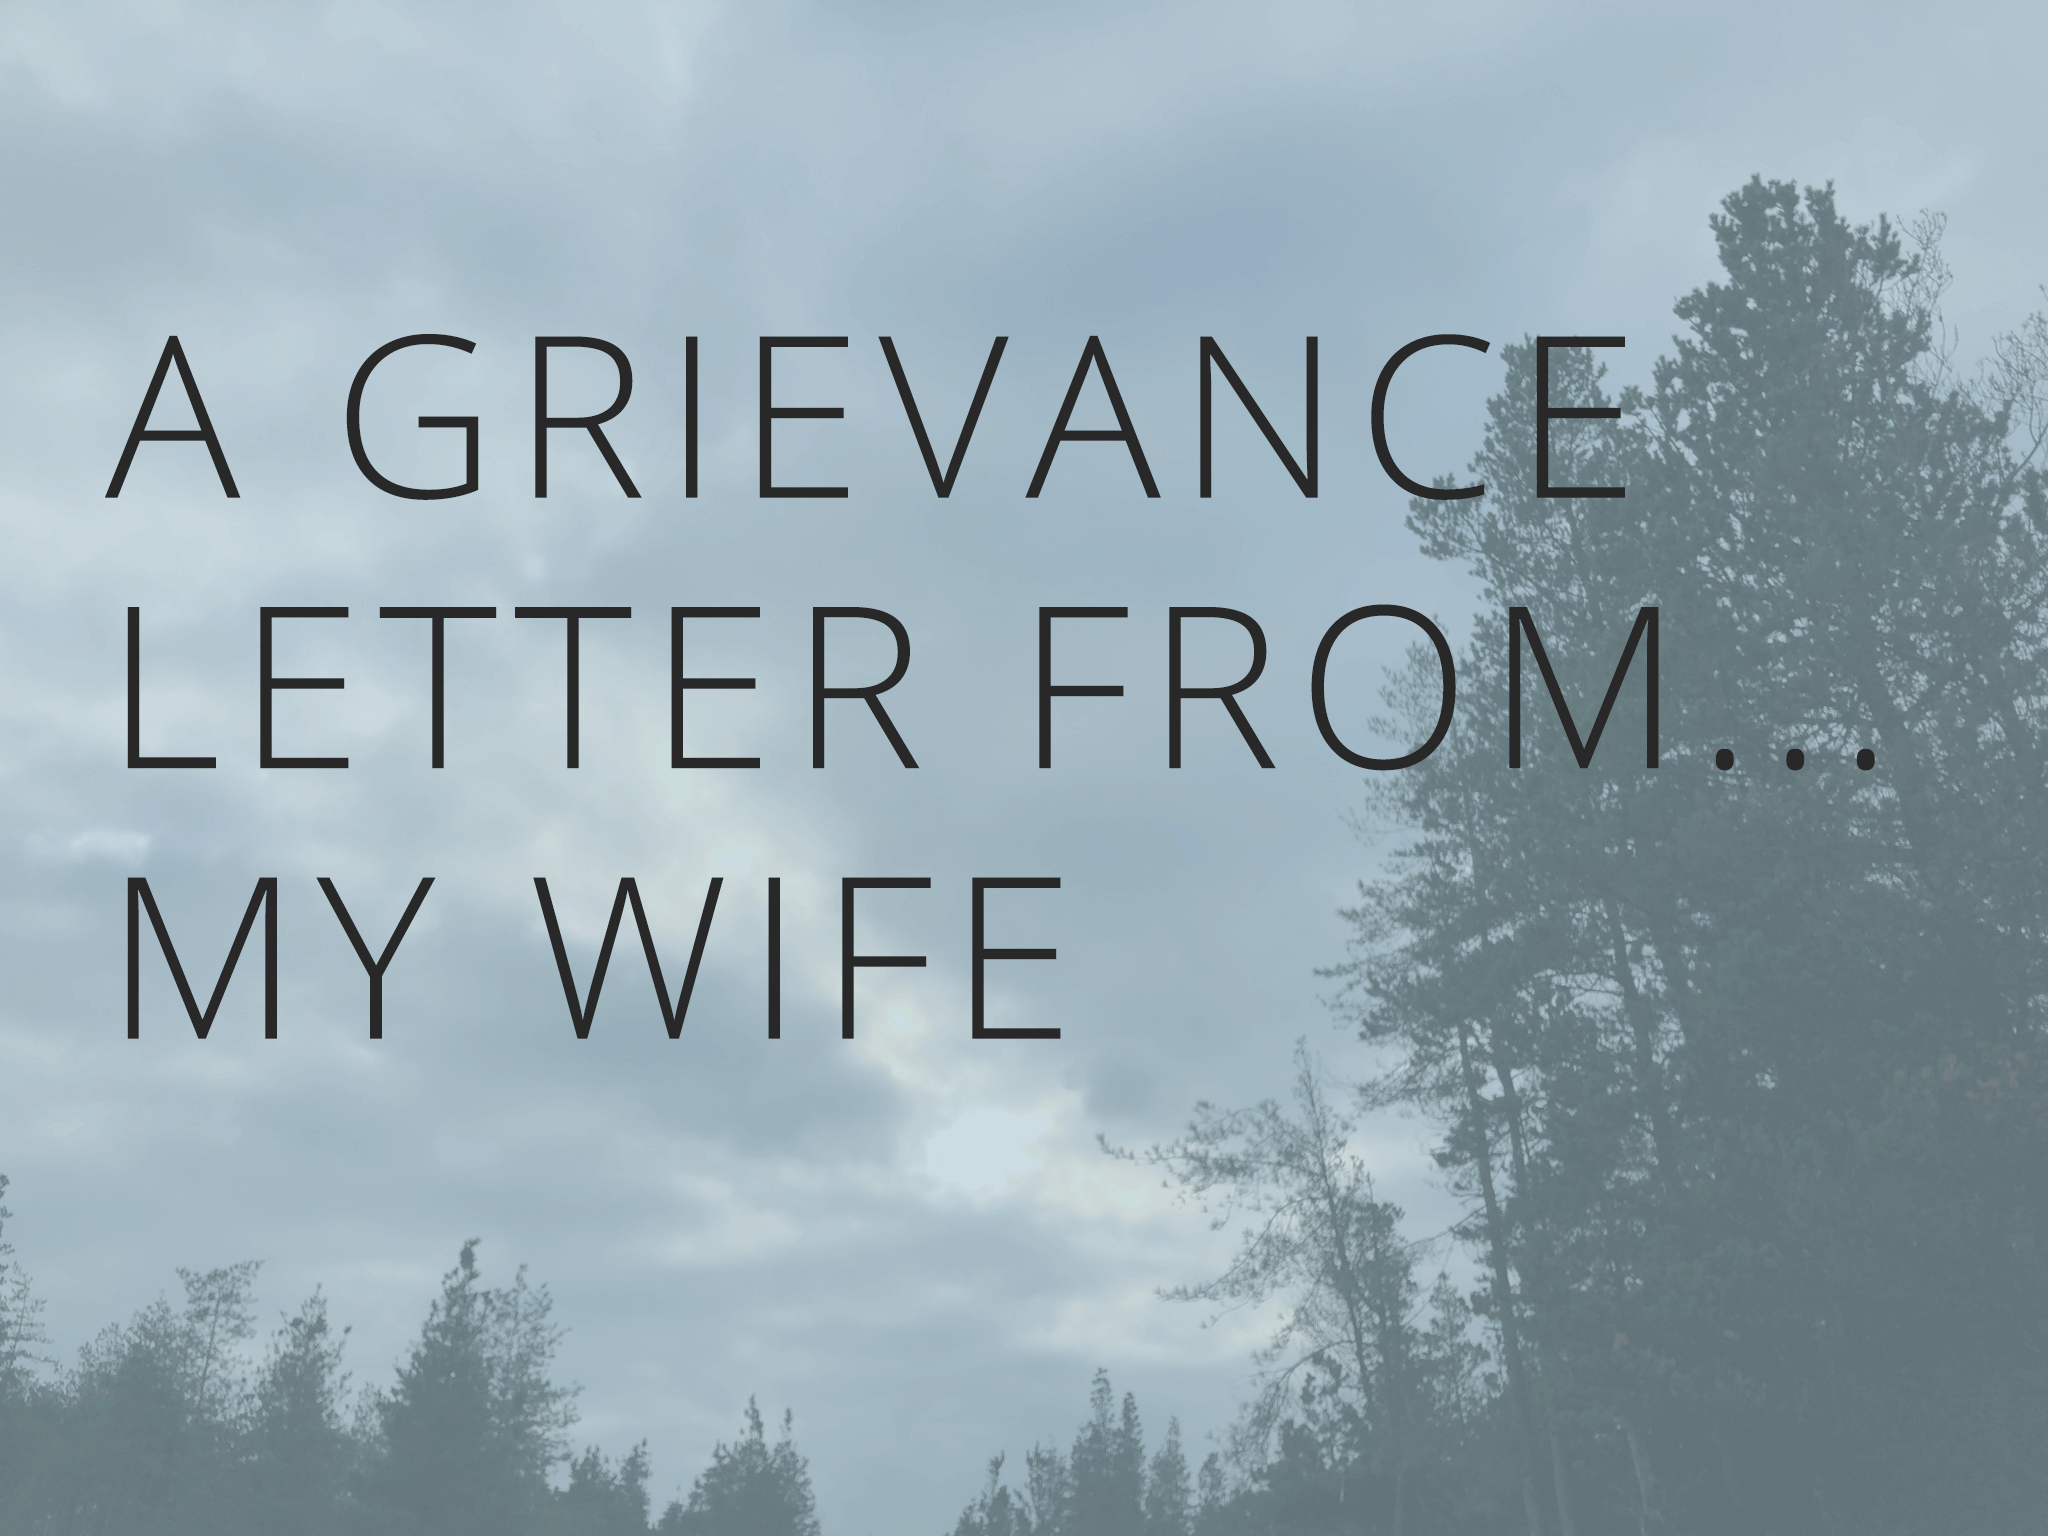 A Grievance Letter From My Wife